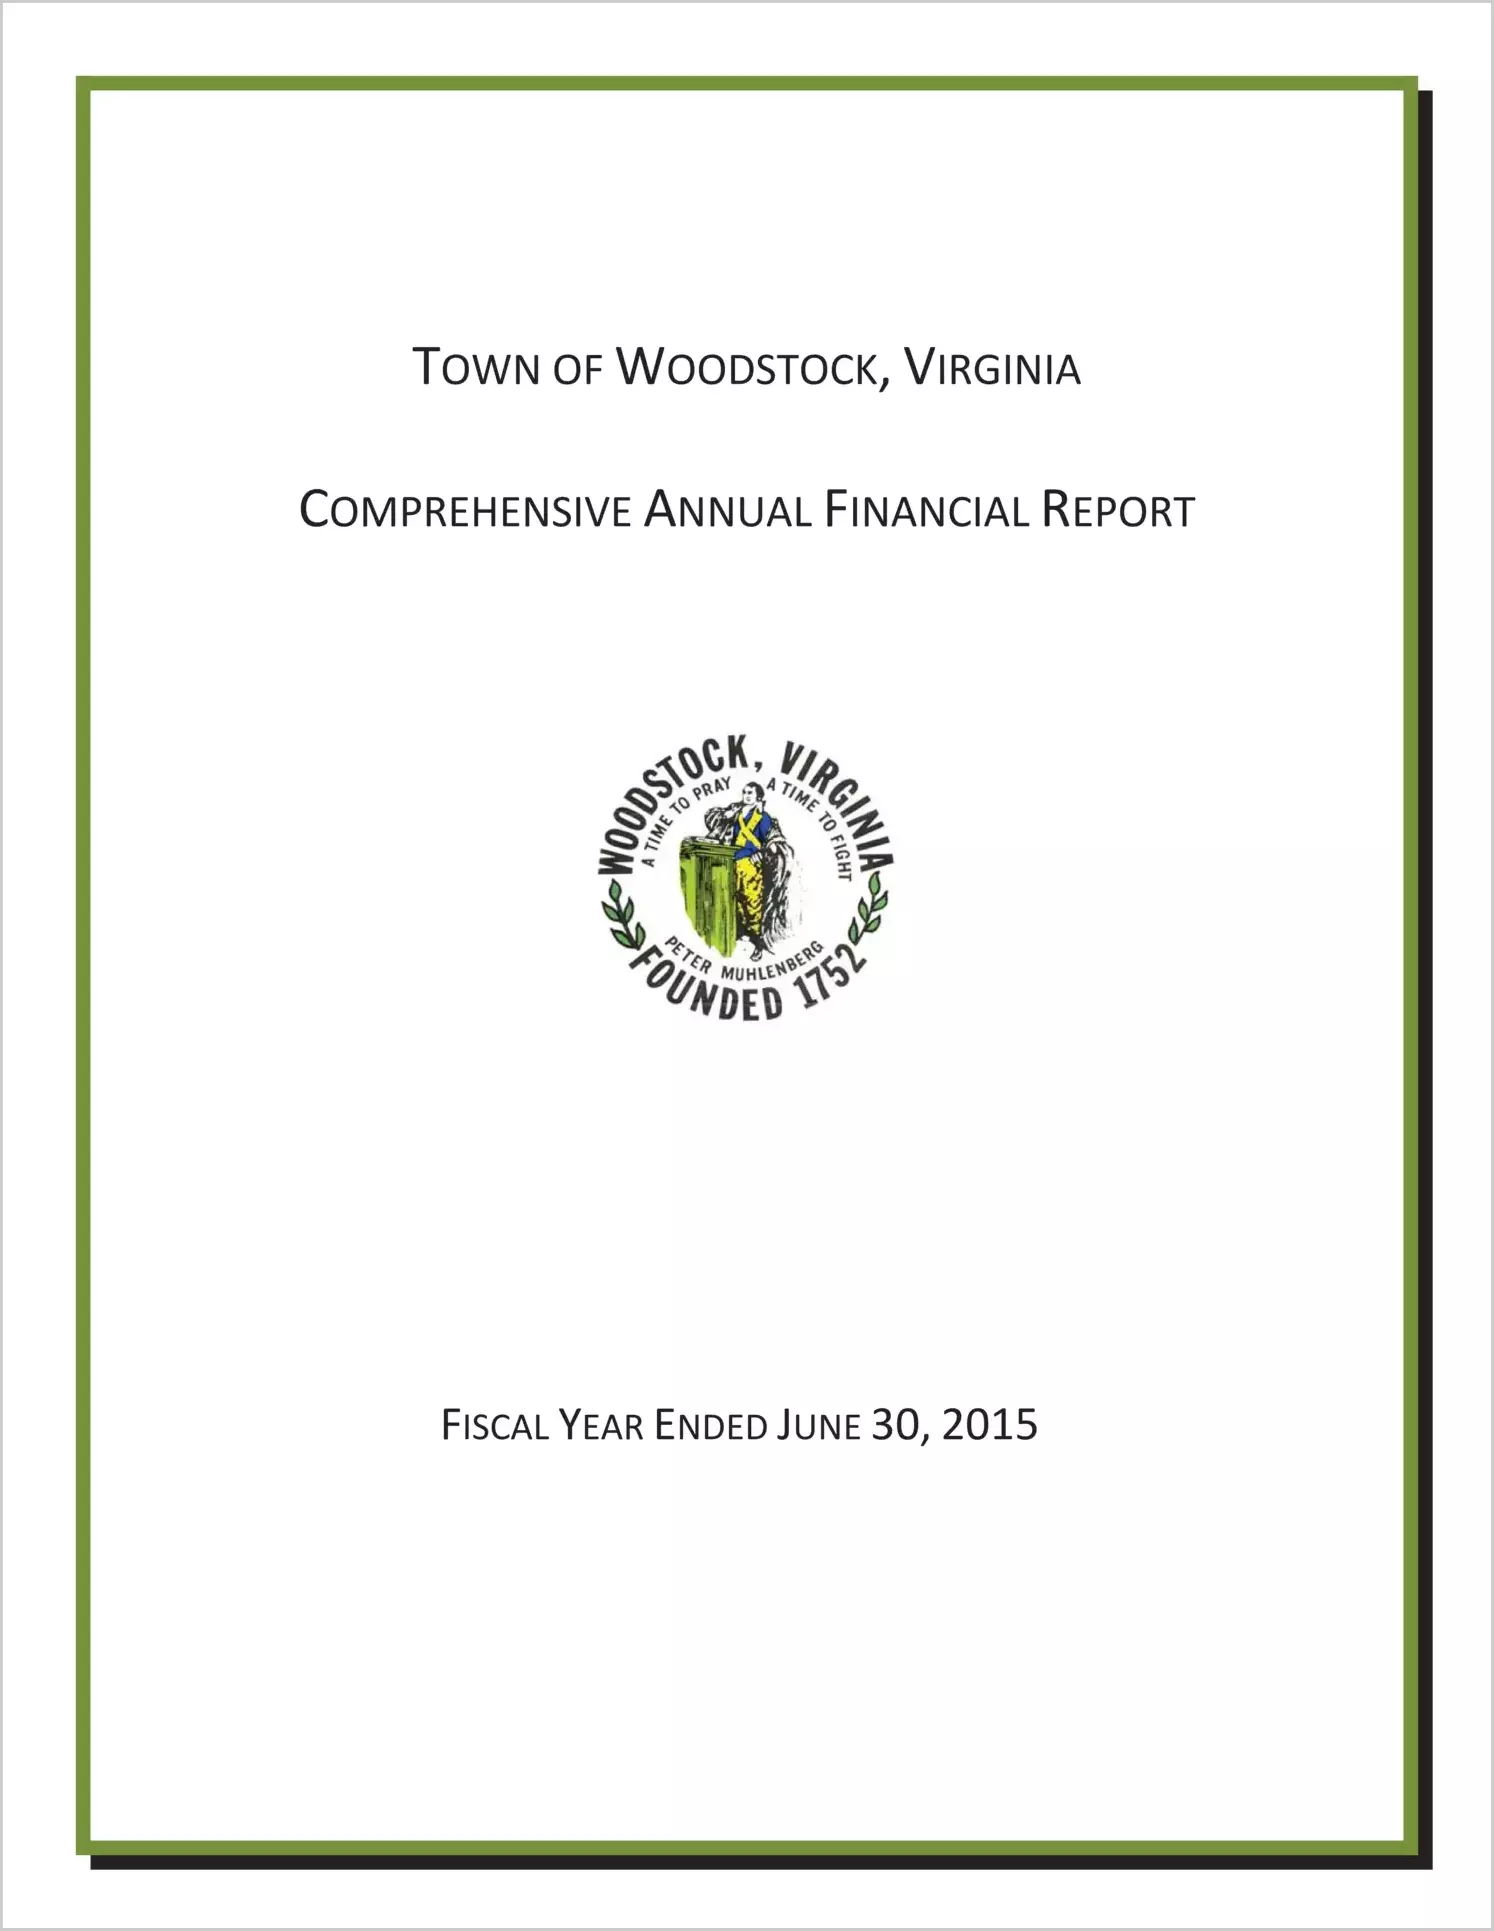 2015 Annual Financial Report for Town of Woodstock